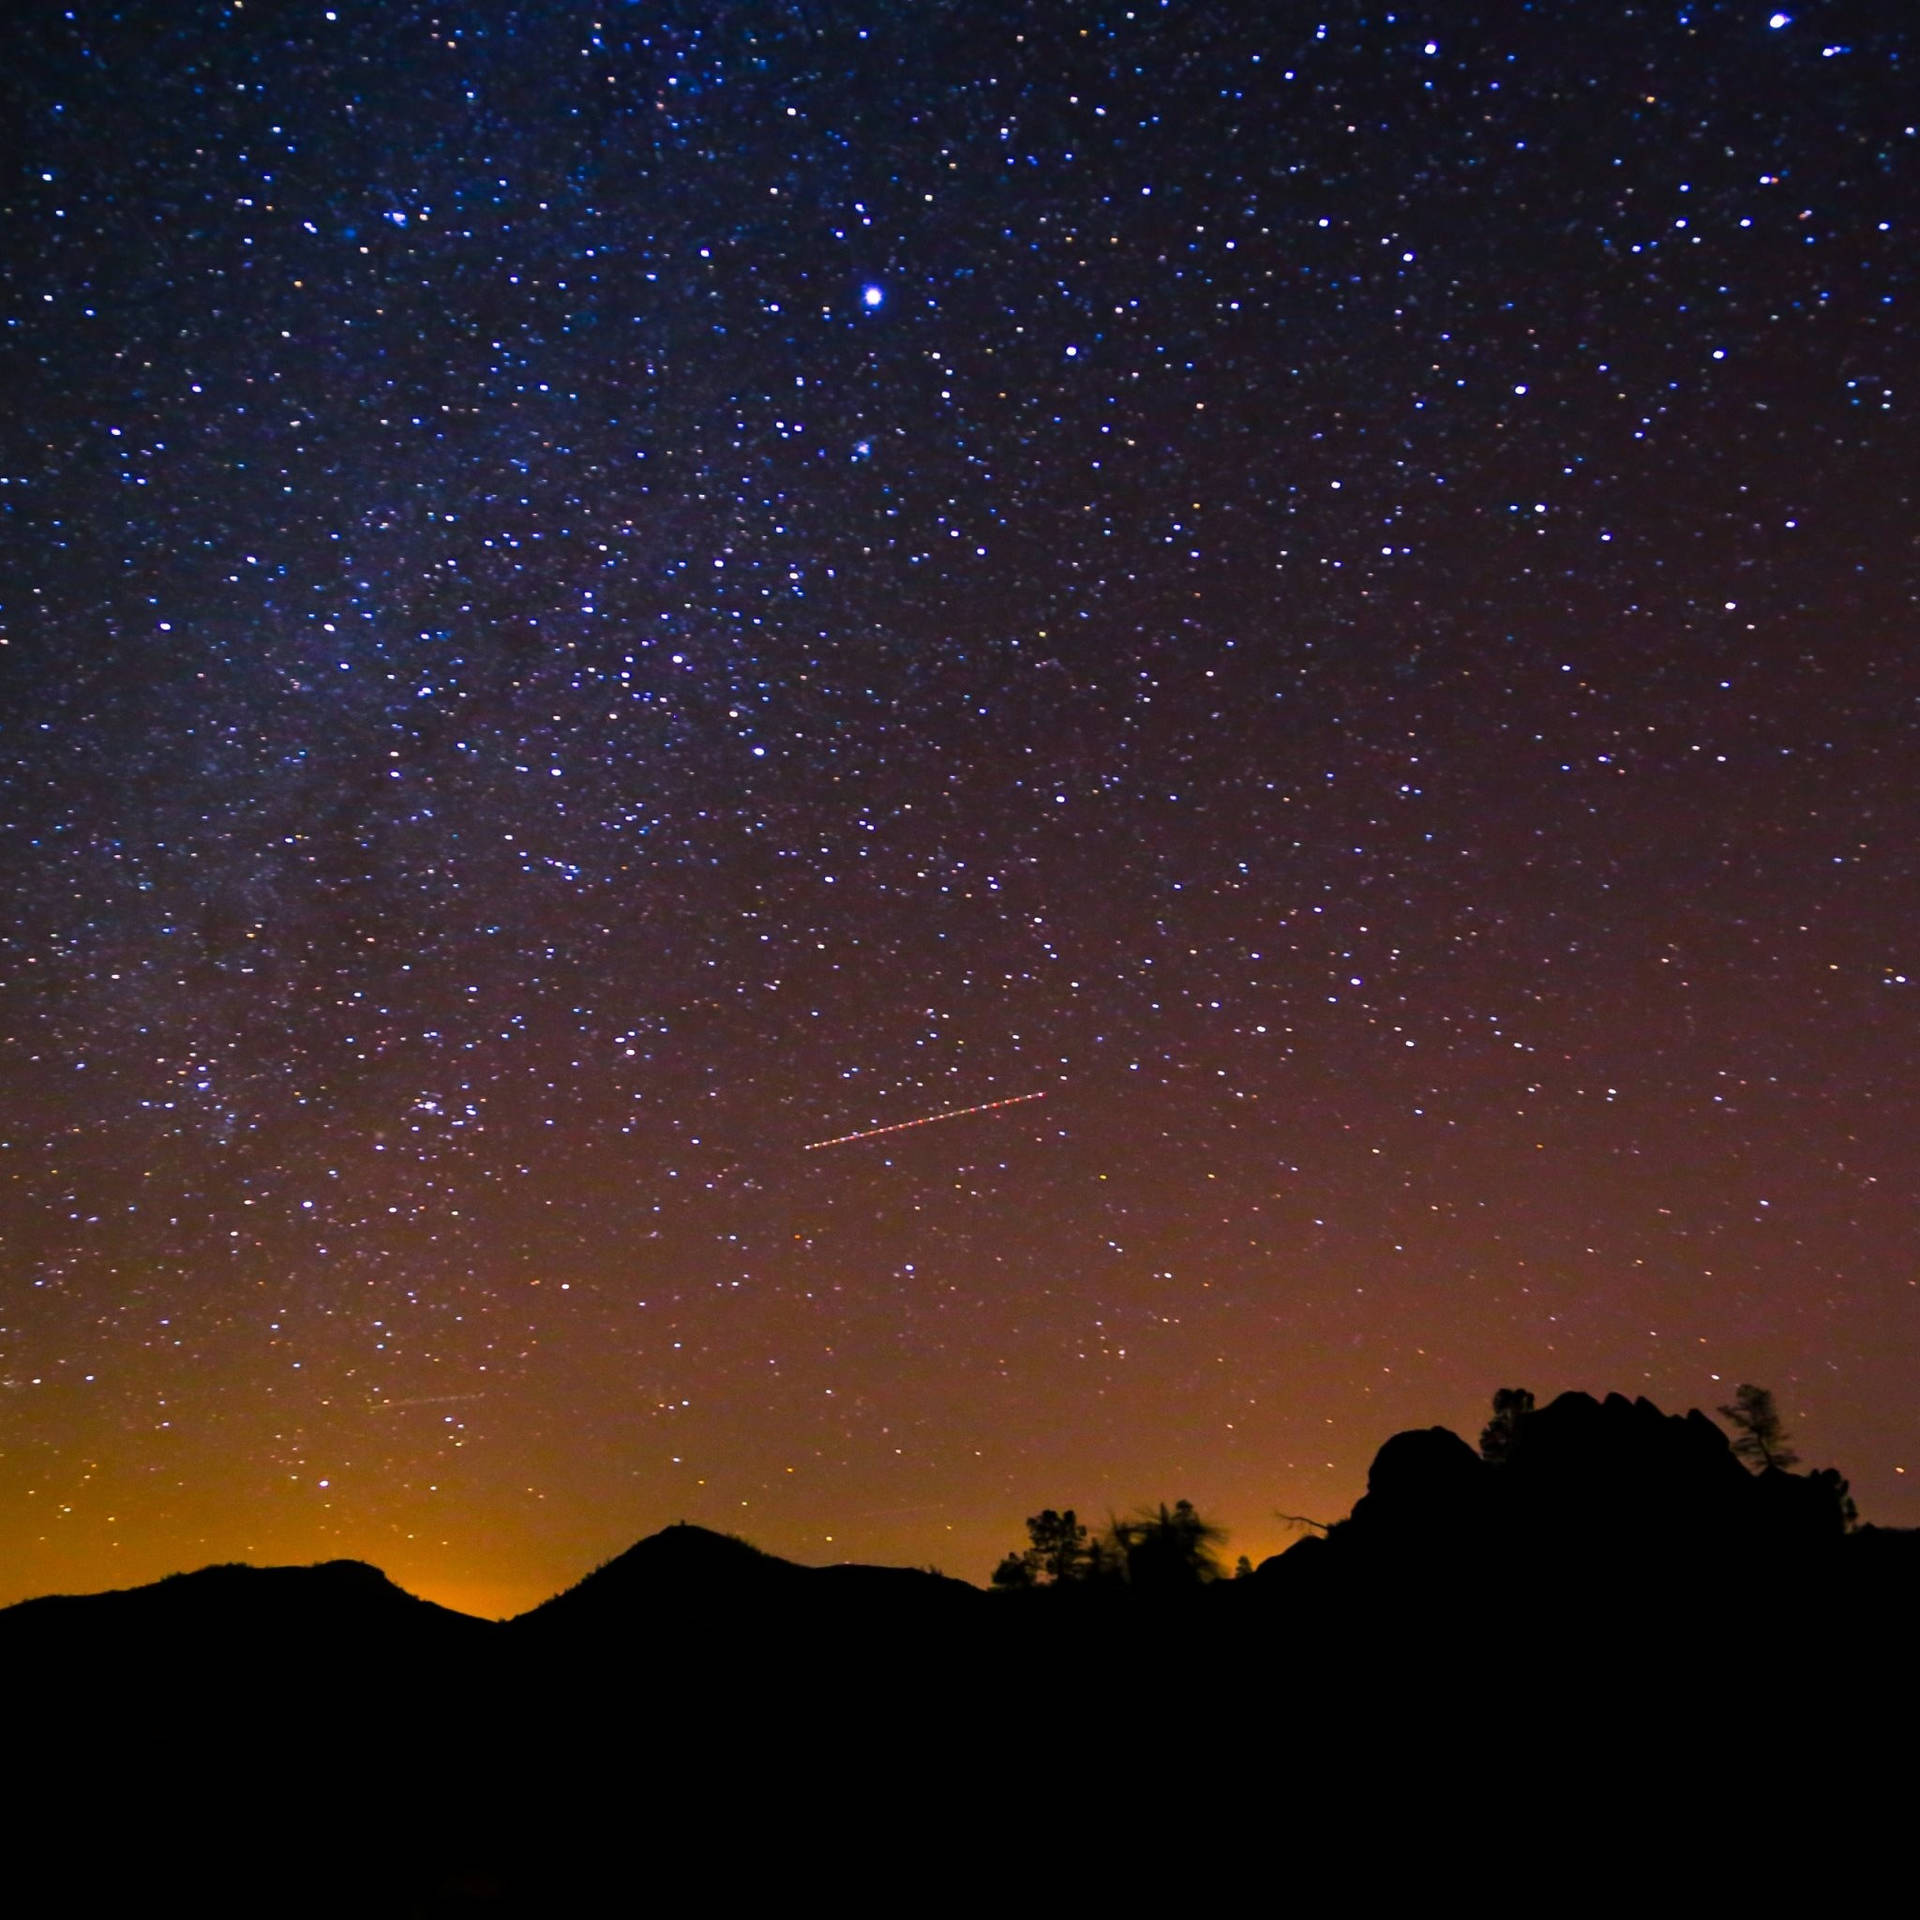 Sky Hd With Meteor Shower Wallpaper